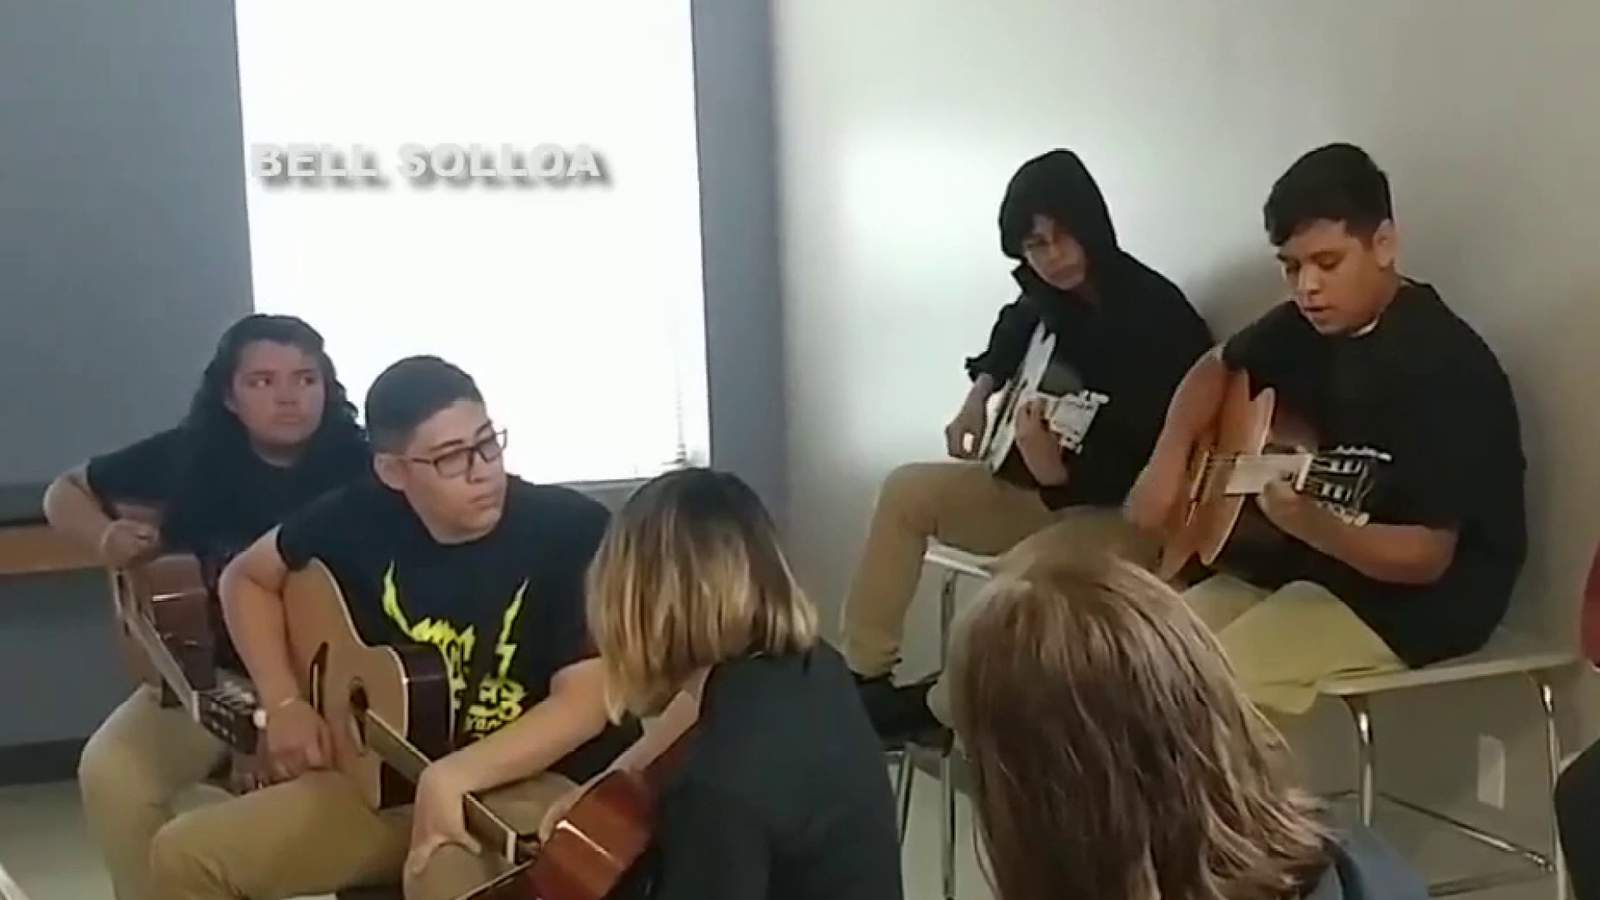 Mother, son create after-school Rock and Roll music program for San Antonio students